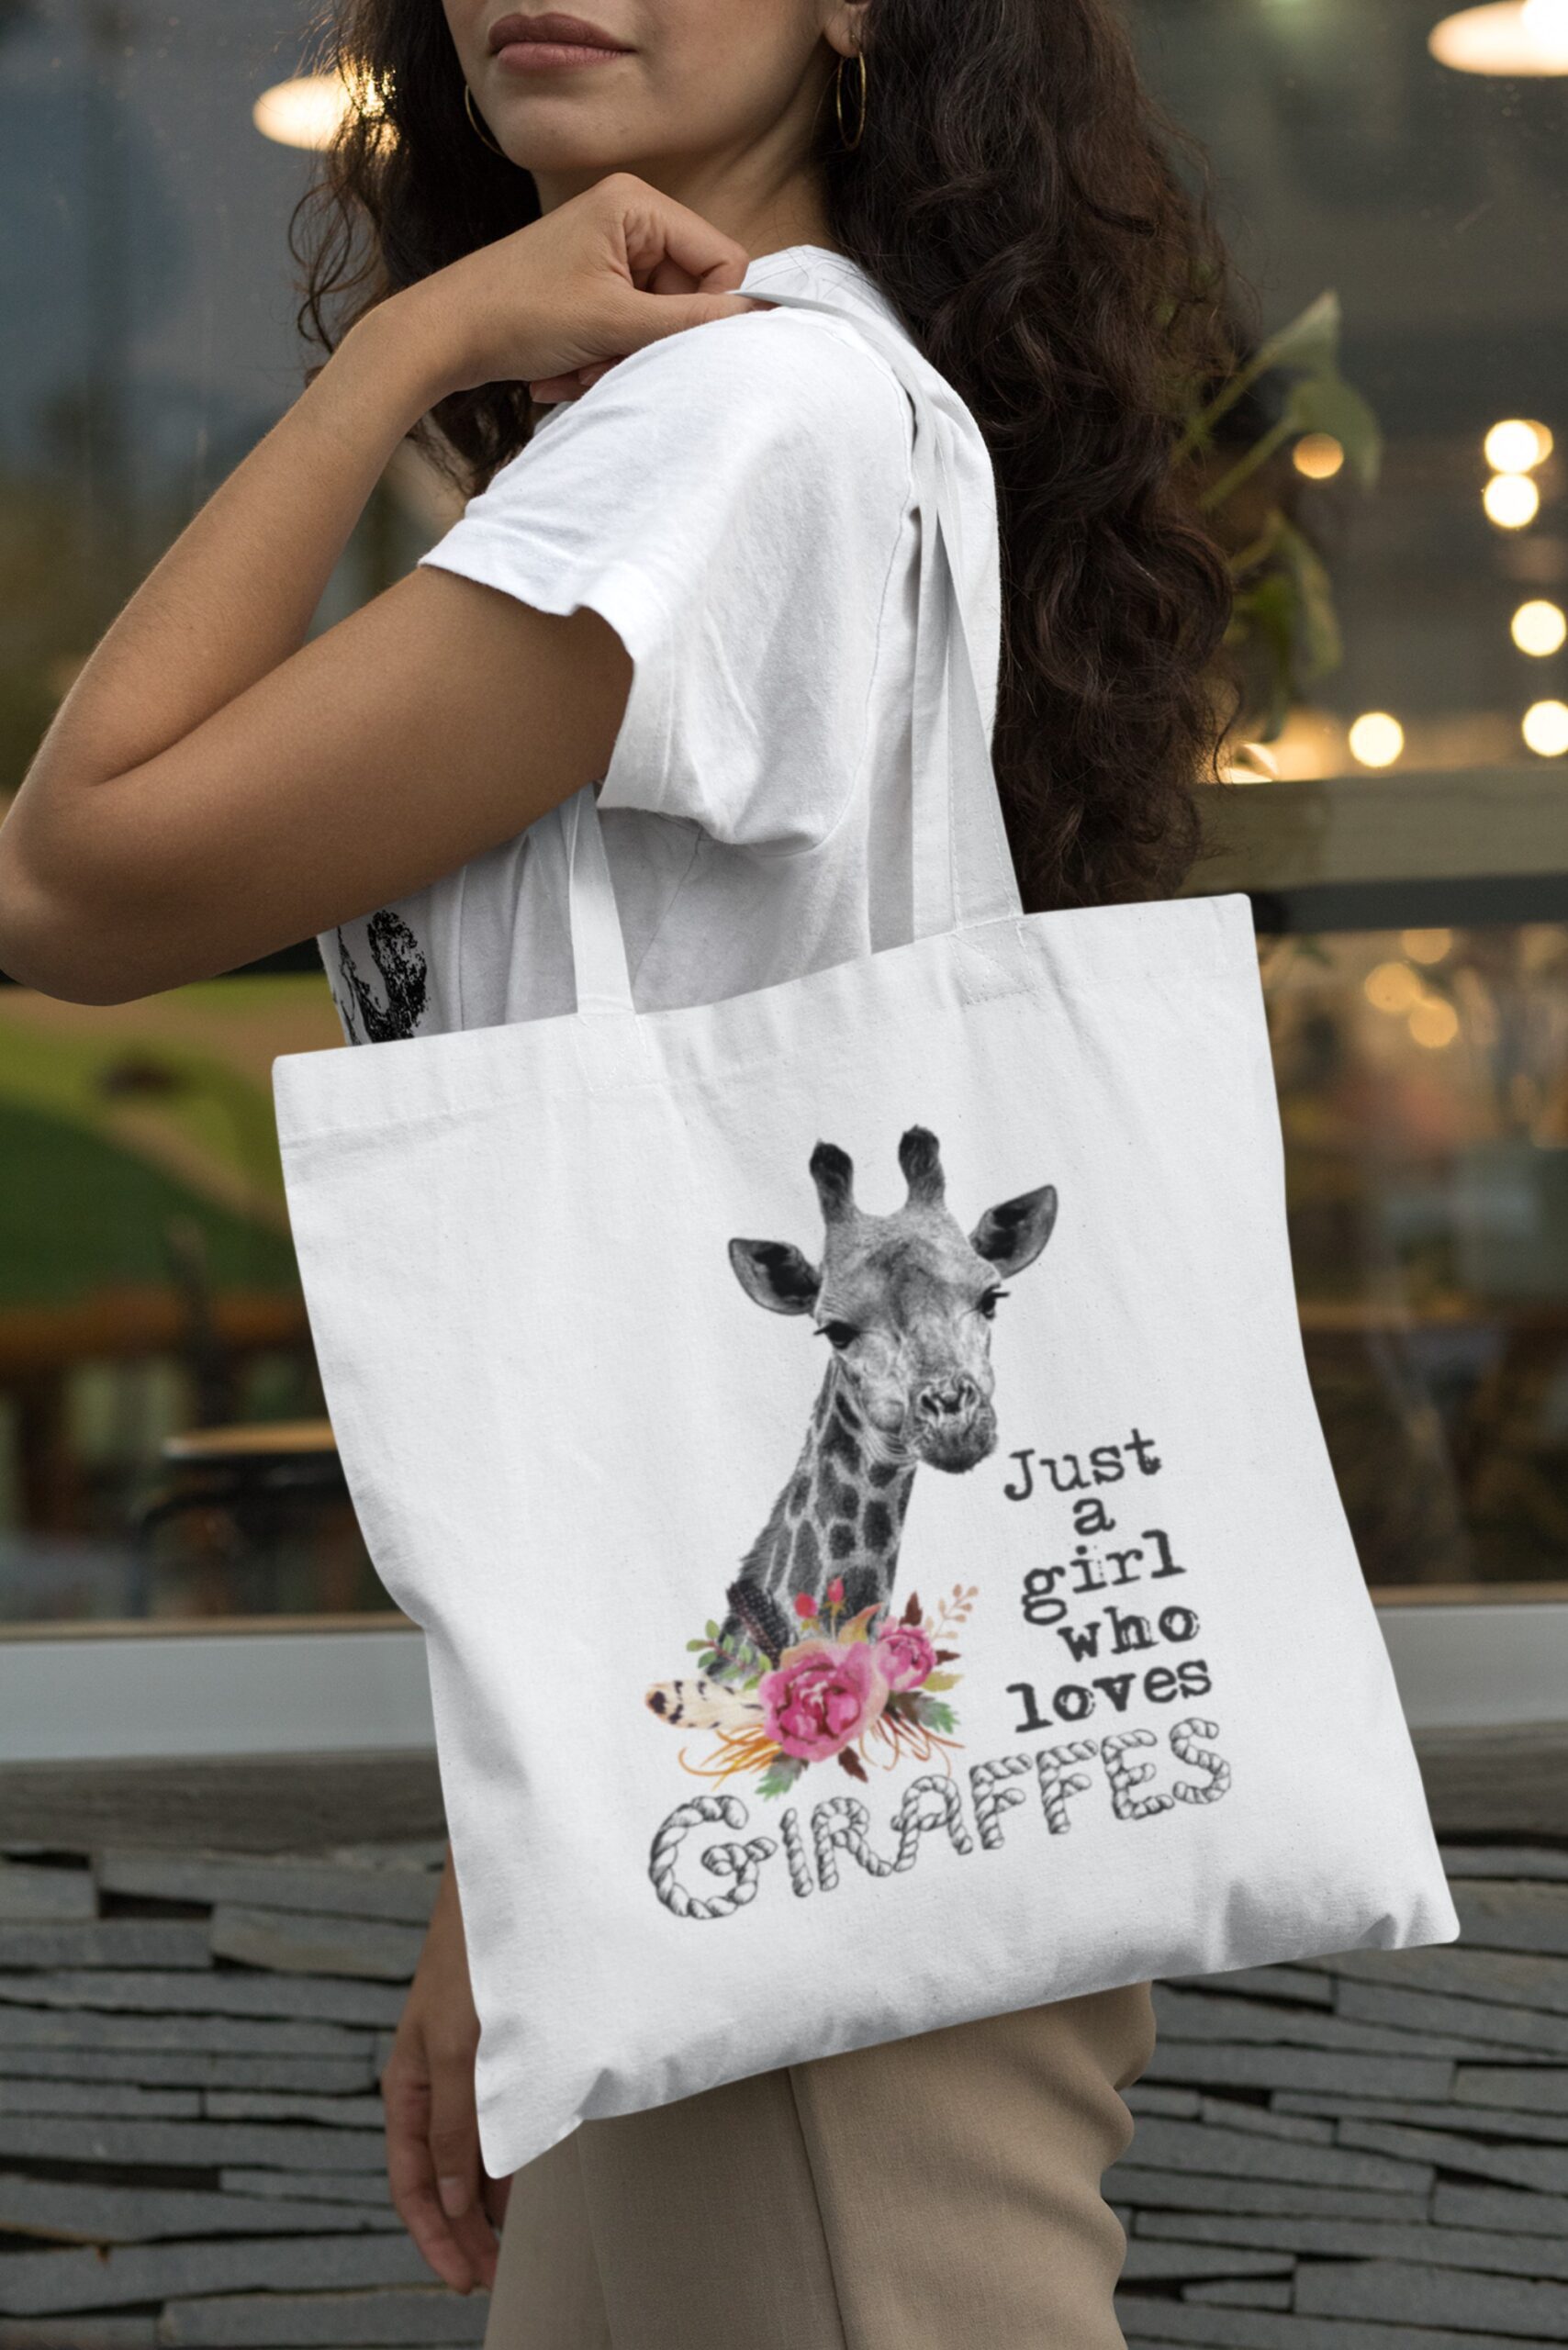 Giraffe Girl Tote Bag - PS Made With Love For You